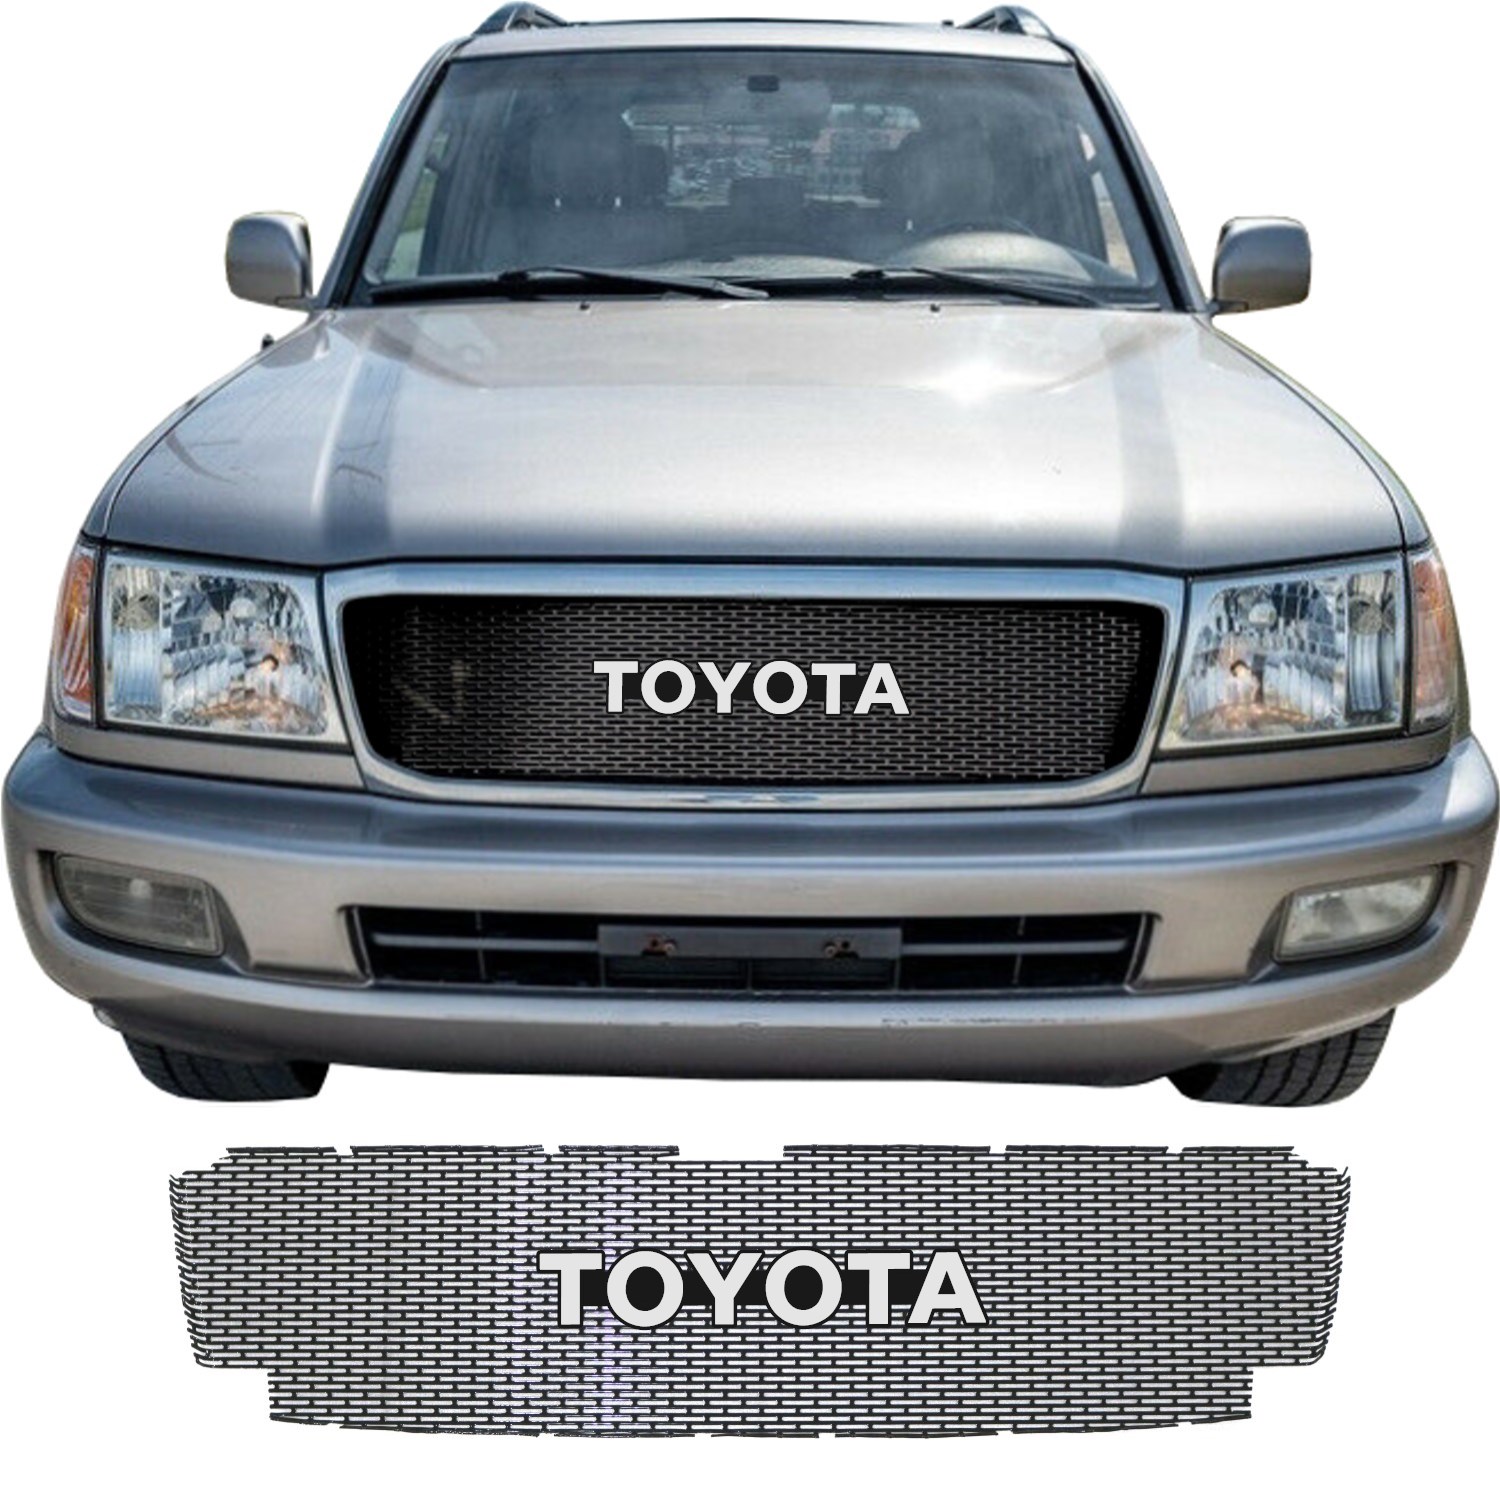 2003 - 2005 Toyota Land Cruiser Series 100 Mesh Grill Insert and Toyota  Emblem by customcargrills